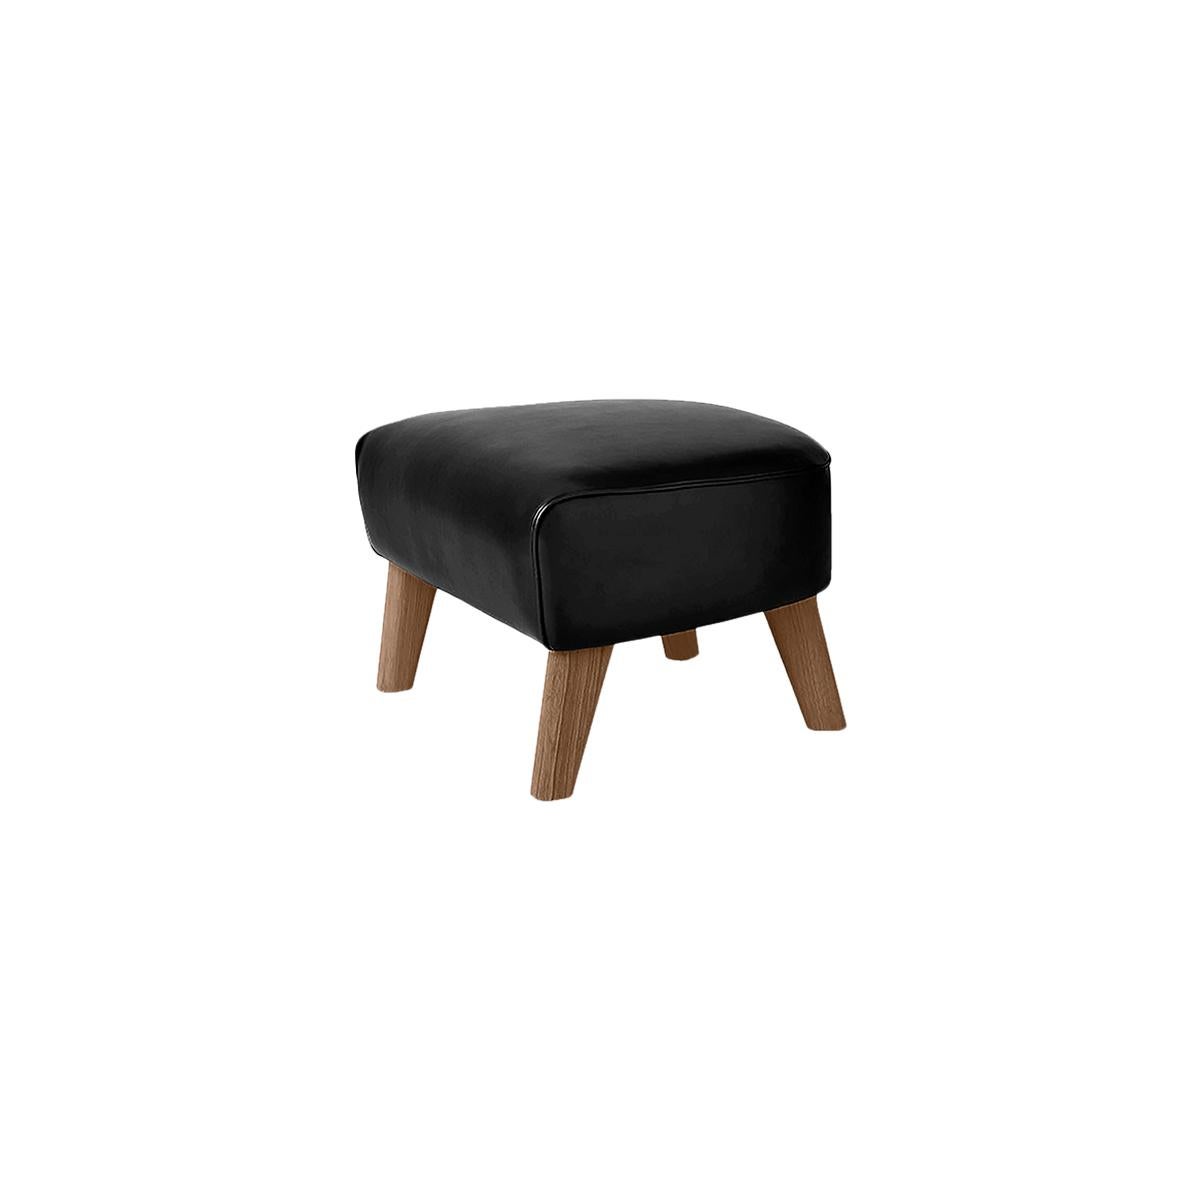 Modern Set of 2 Black Leather and Smoked Oak My Own Chair Footstools by Lassen